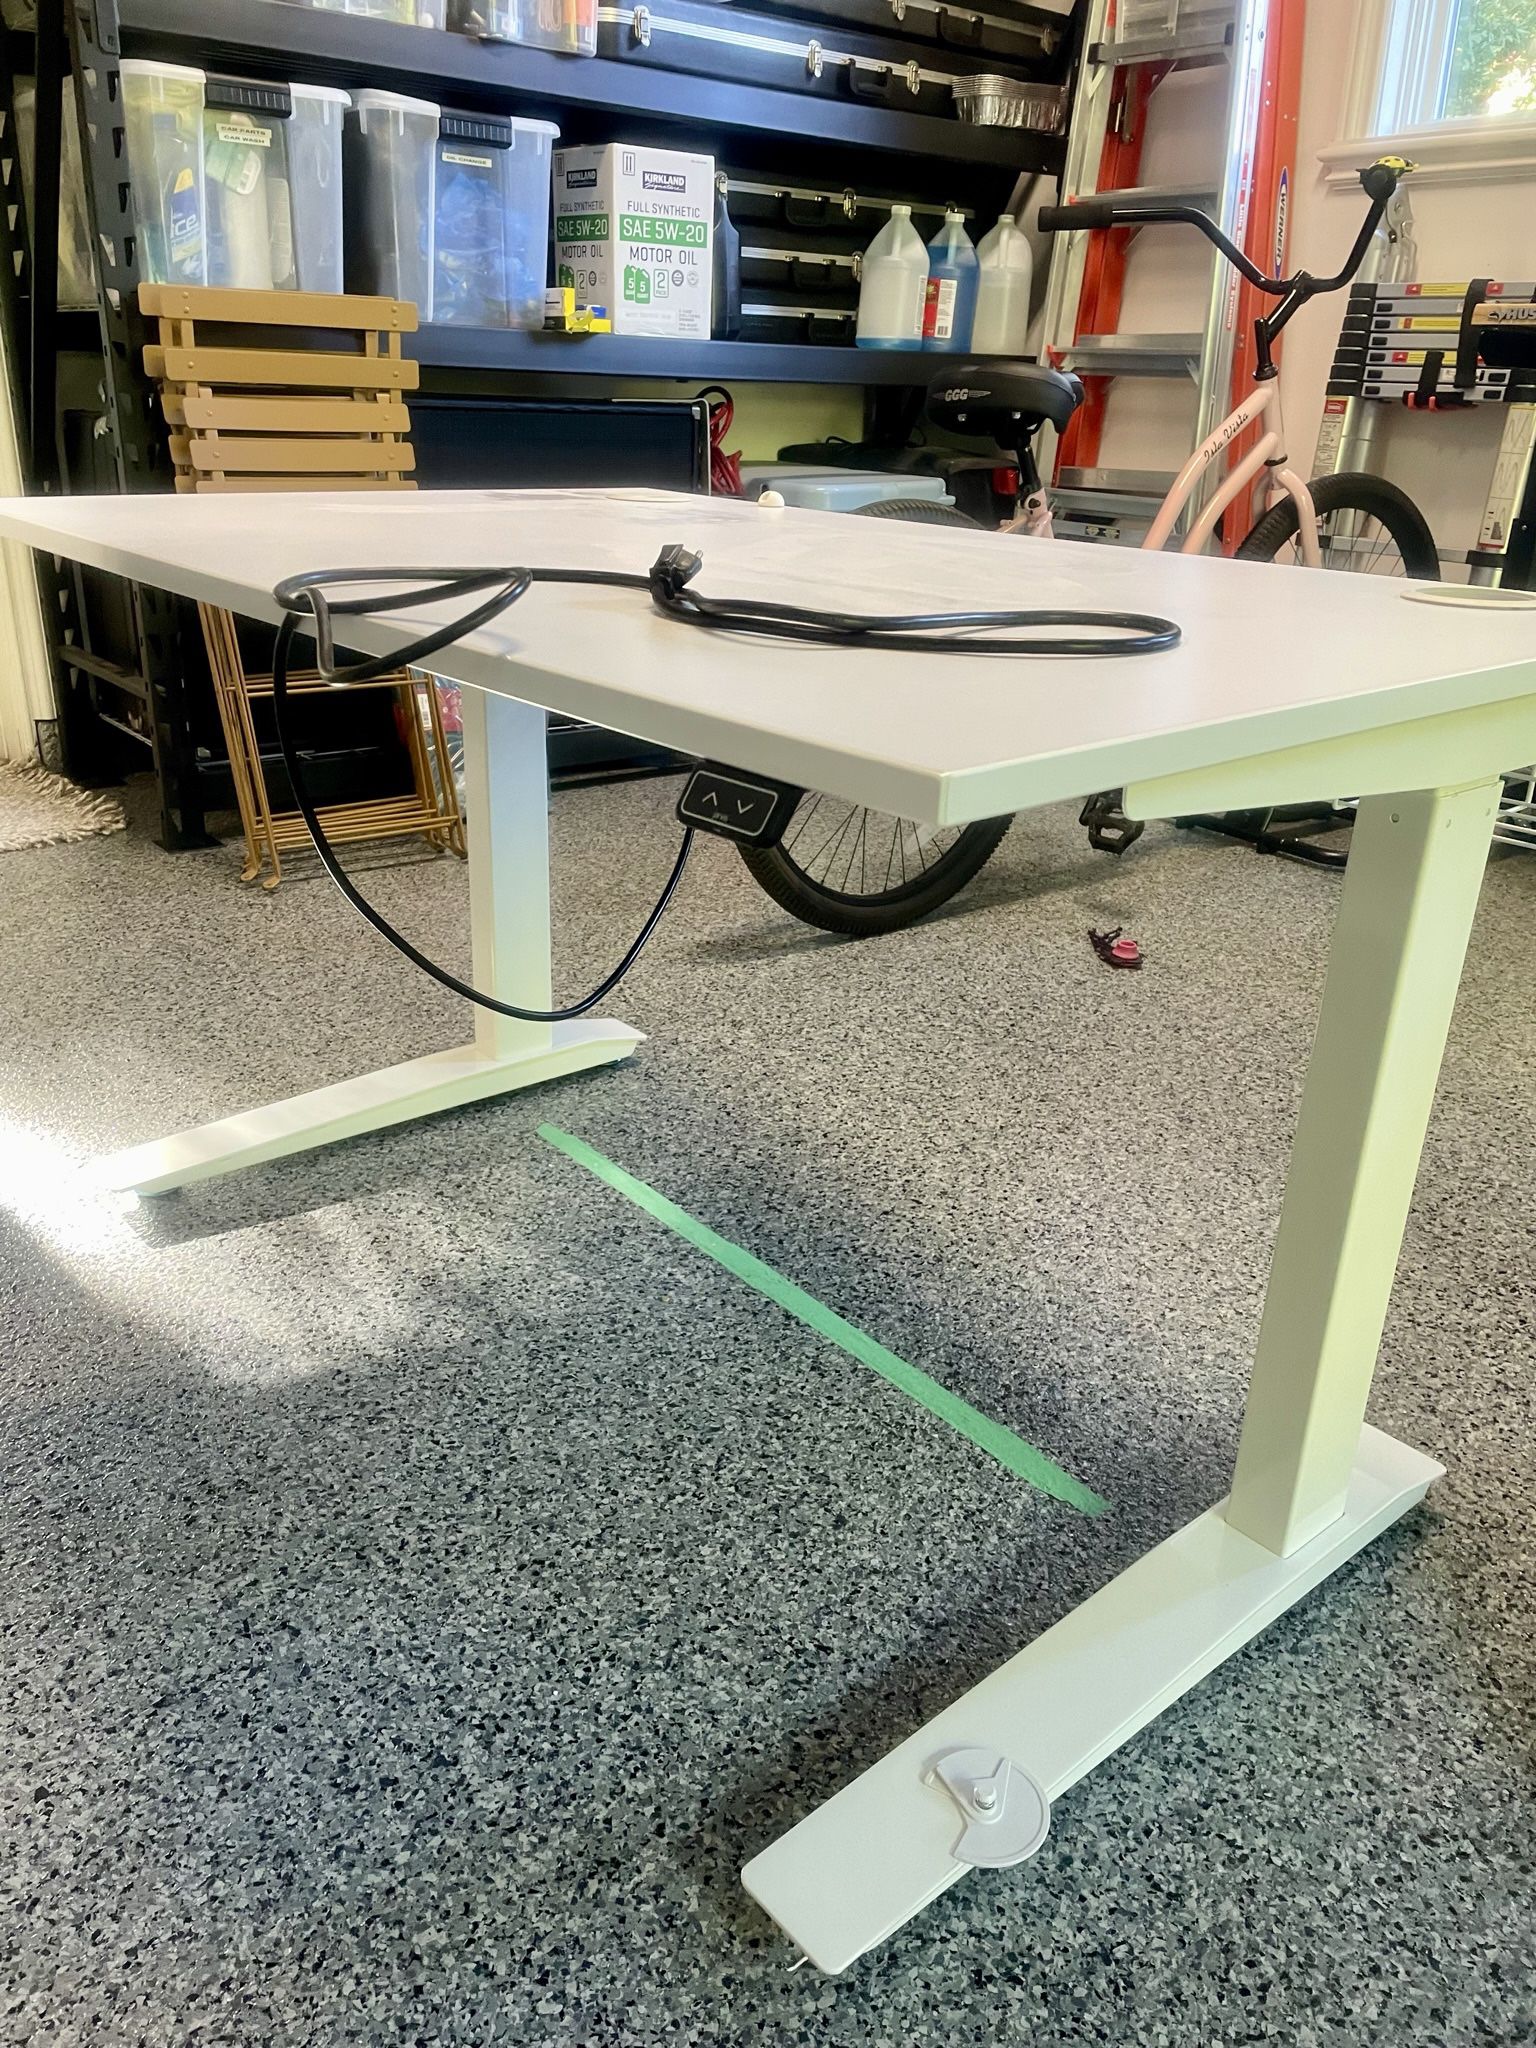 Fully Jarvis White Sit-to-Stand Desk